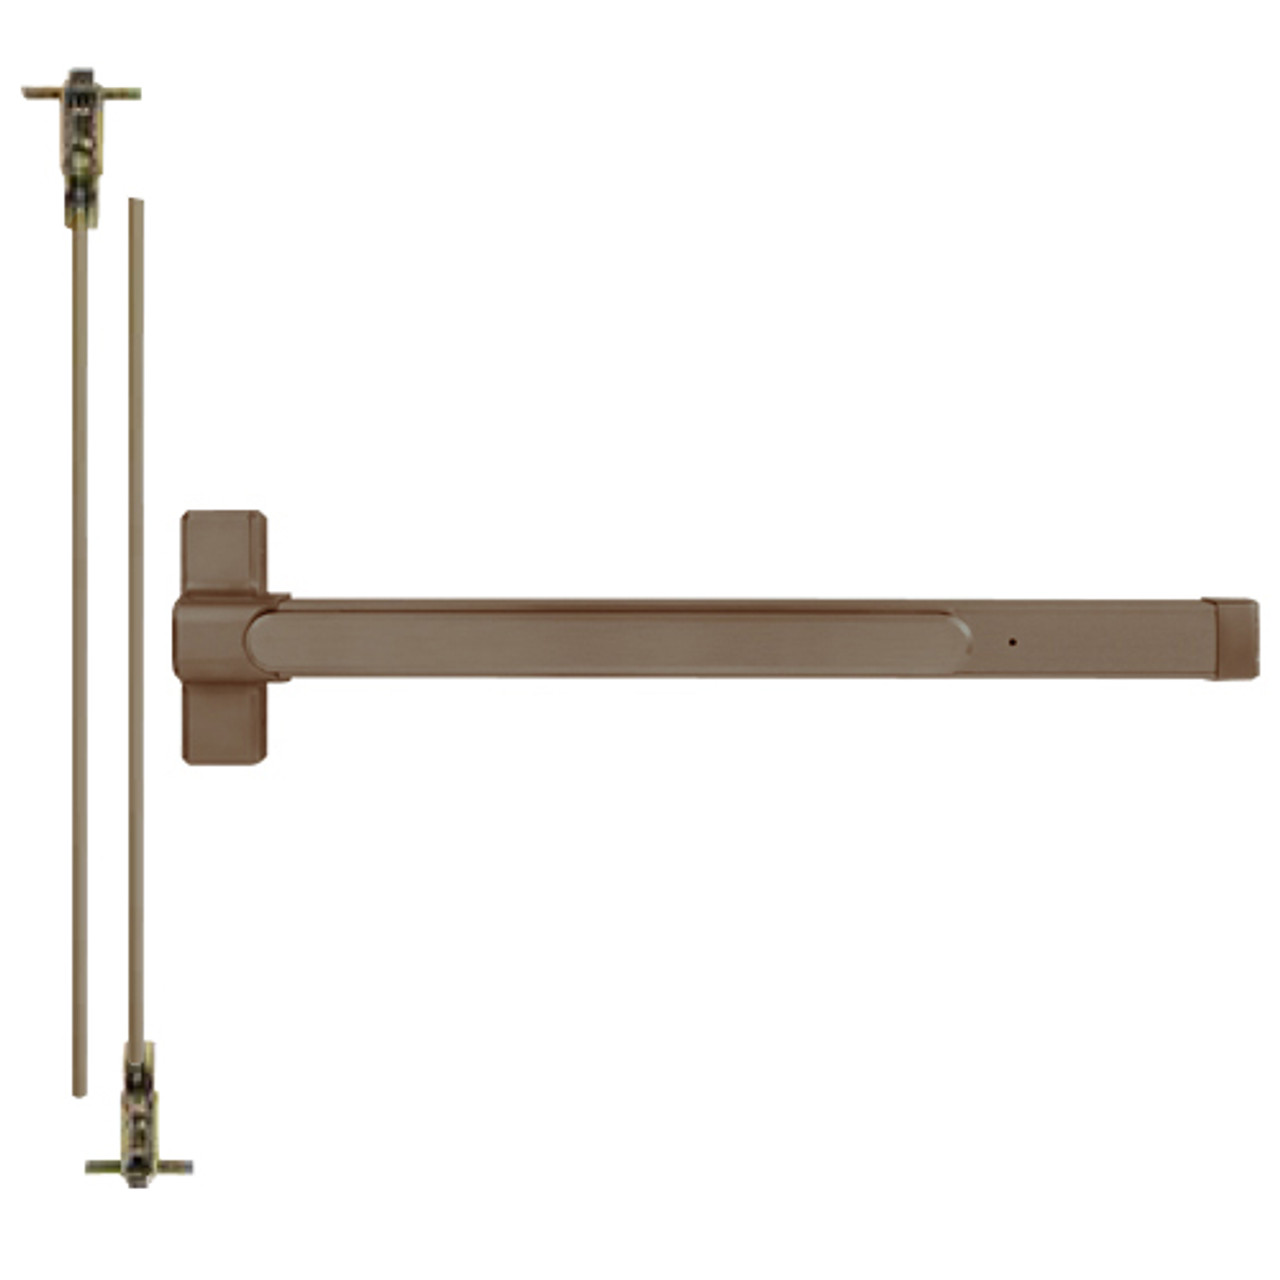 QED124ED-48-8-313AN Stanley QED100 Series Heavy Duty Concealed Vertical Rod Hex Dog Exit Device in Anodized Duranodic Bronze Finish